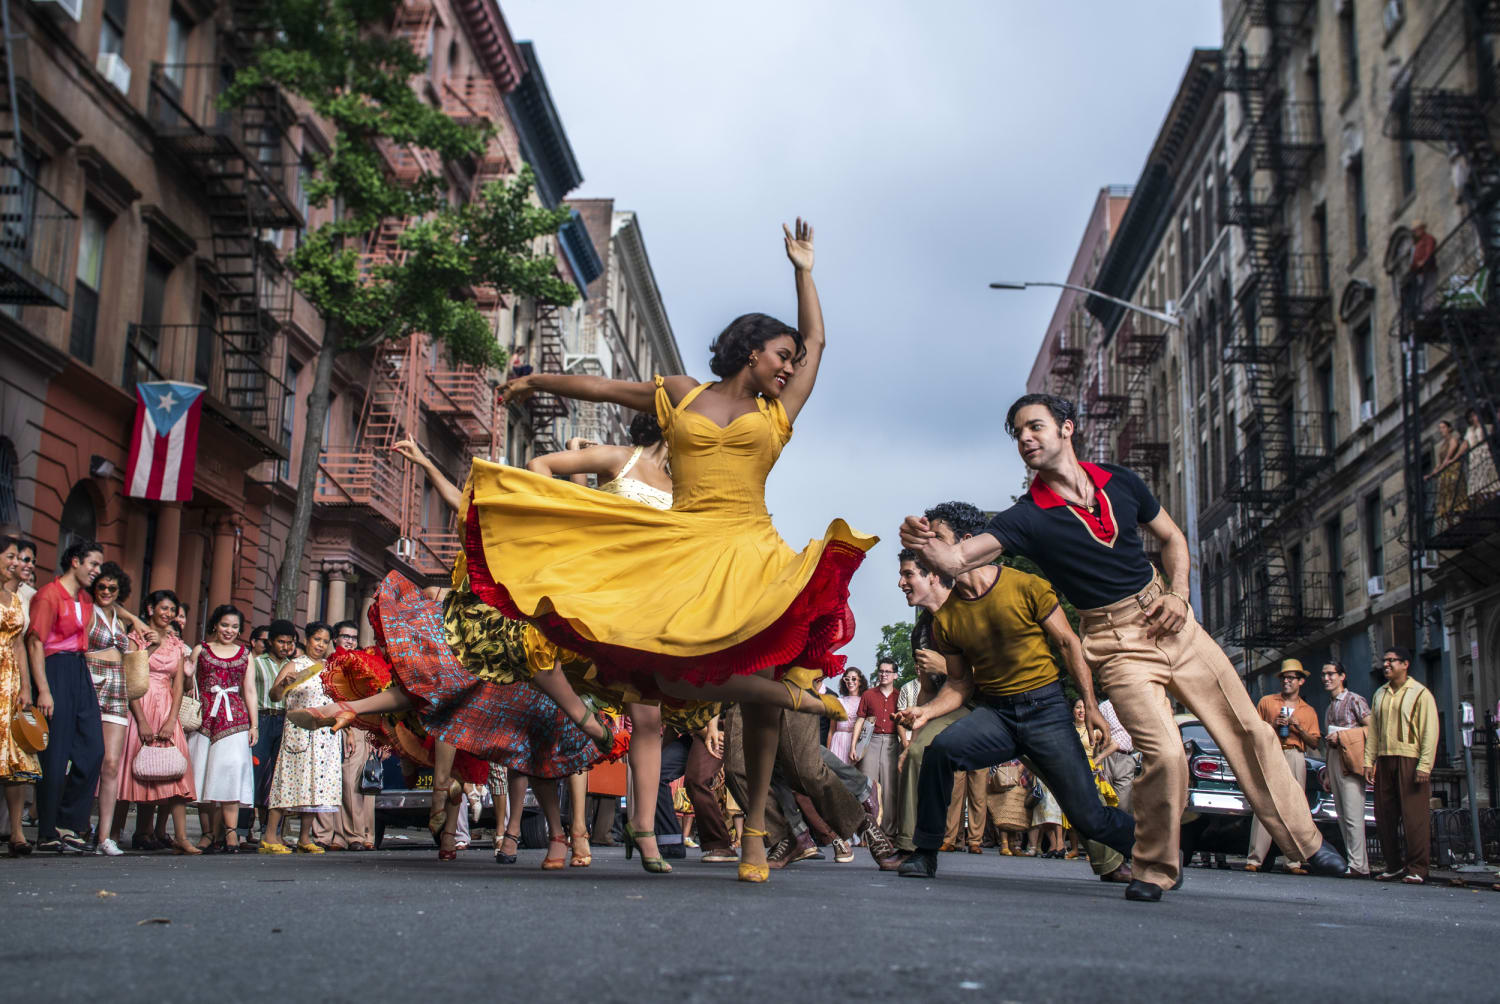 Steven Spielberg can’t keep ‘West Side Story’ from degrading Puerto Ricans